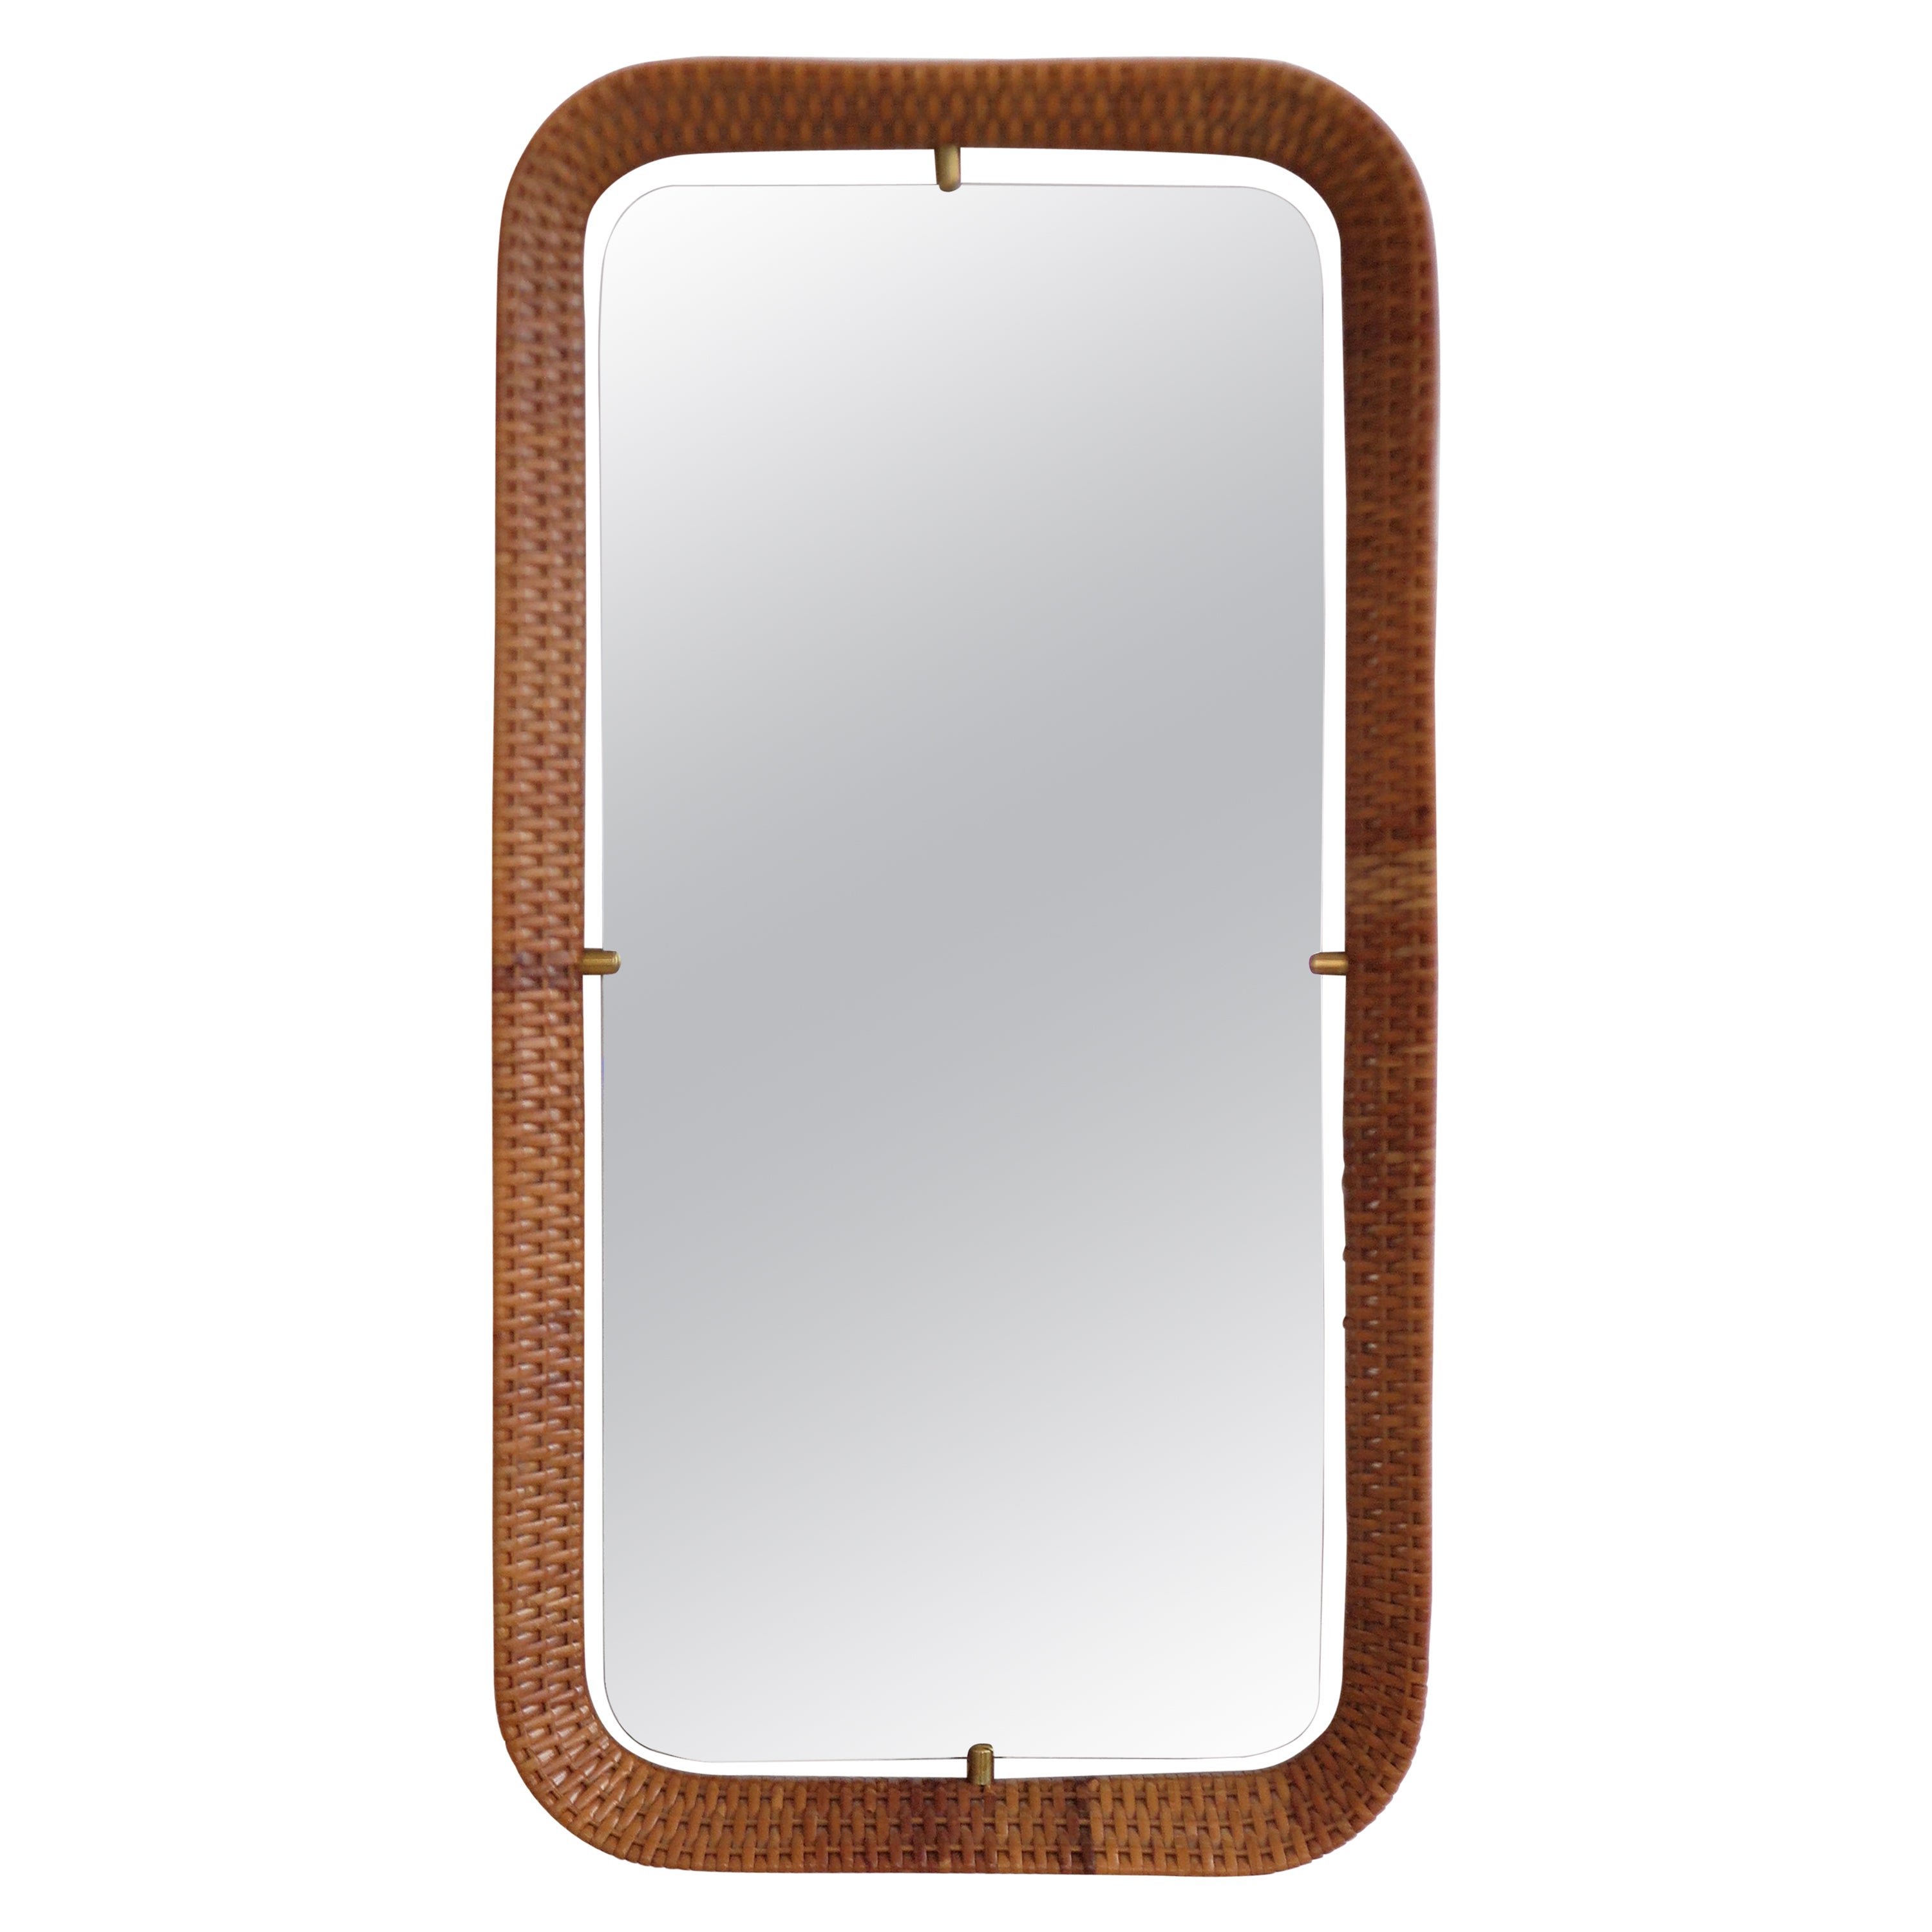 Italian Midcentury Wall Mirror with Bamboo Frame, 1960s For Sale